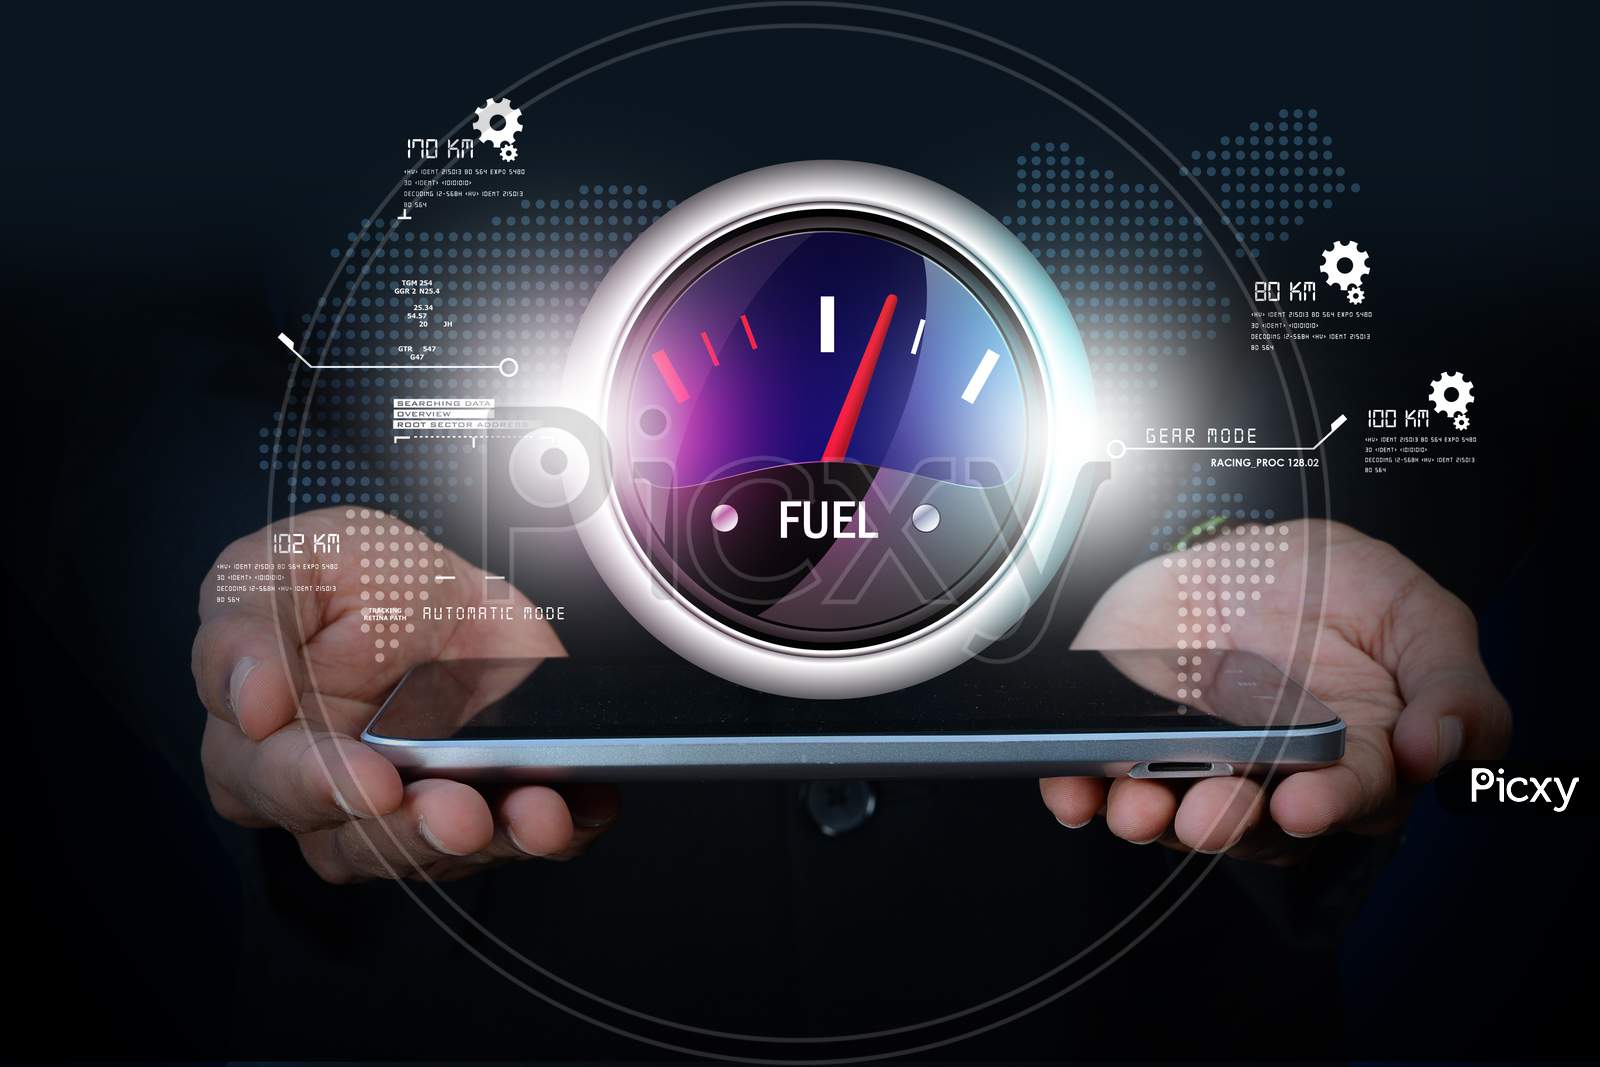 Close up shot of a Person's Hand holding a Tablet or iPad with Fuel Indicator